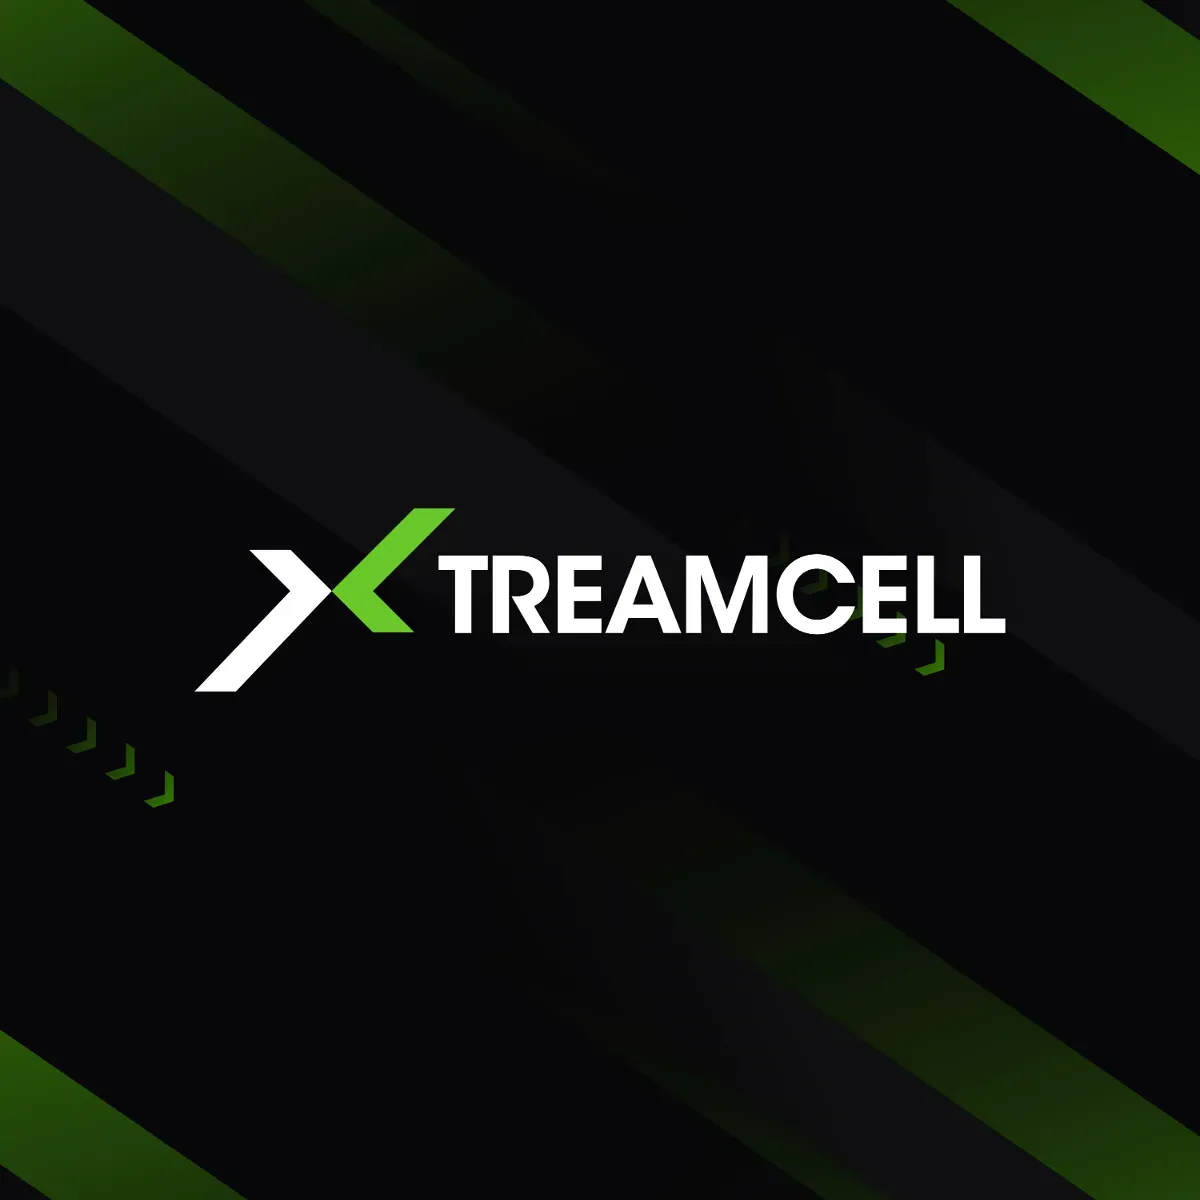 Xtreamcell